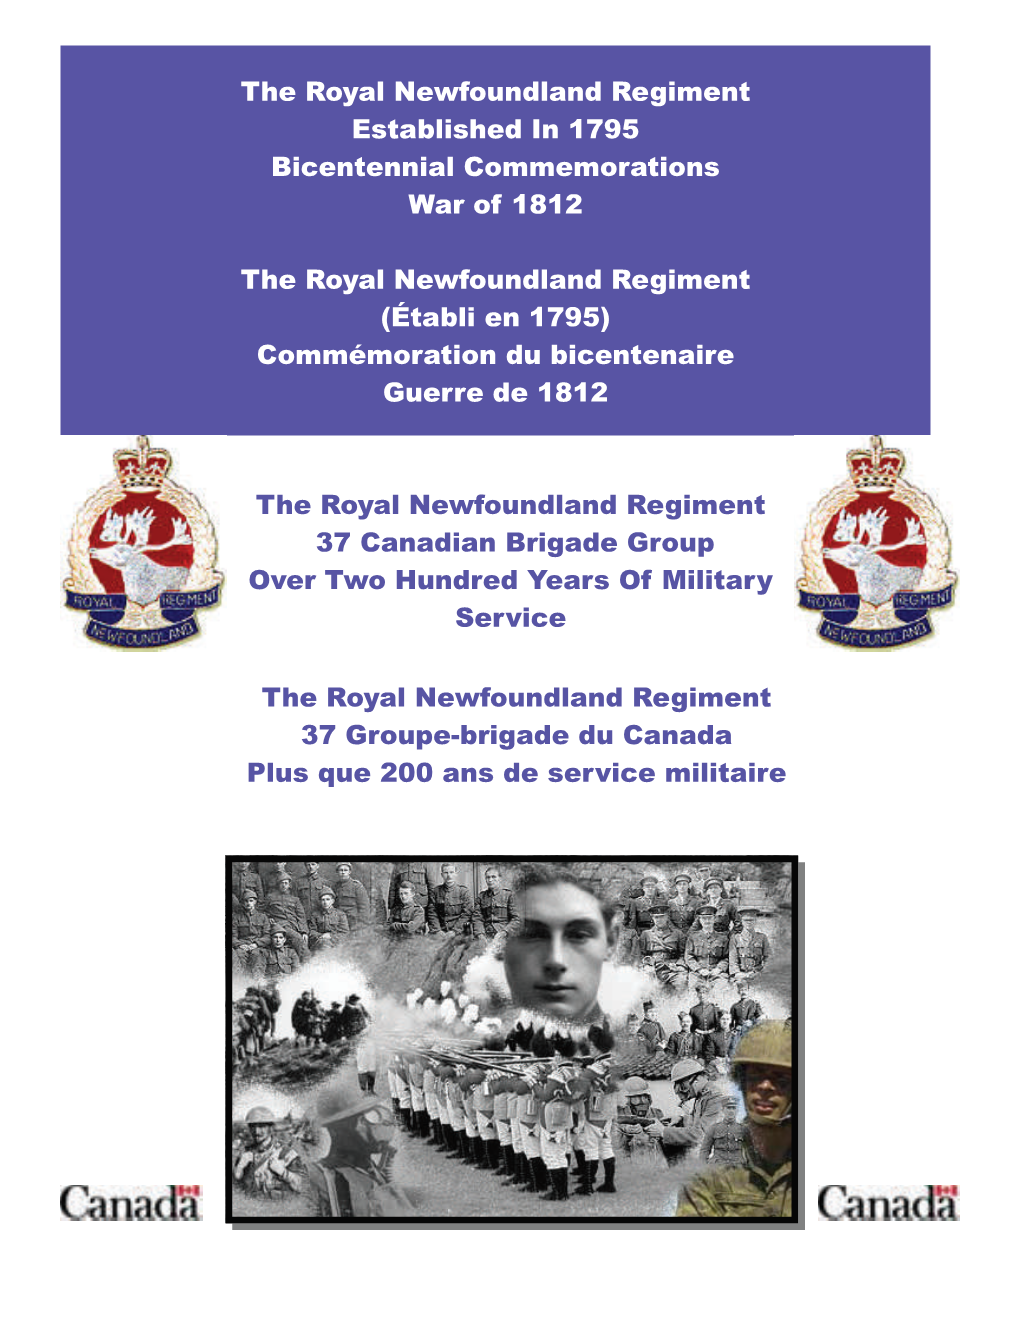 The Royal Newfoundland Regiment 37 Canadian Brigade Group Over Two Hundred Years of Military Service